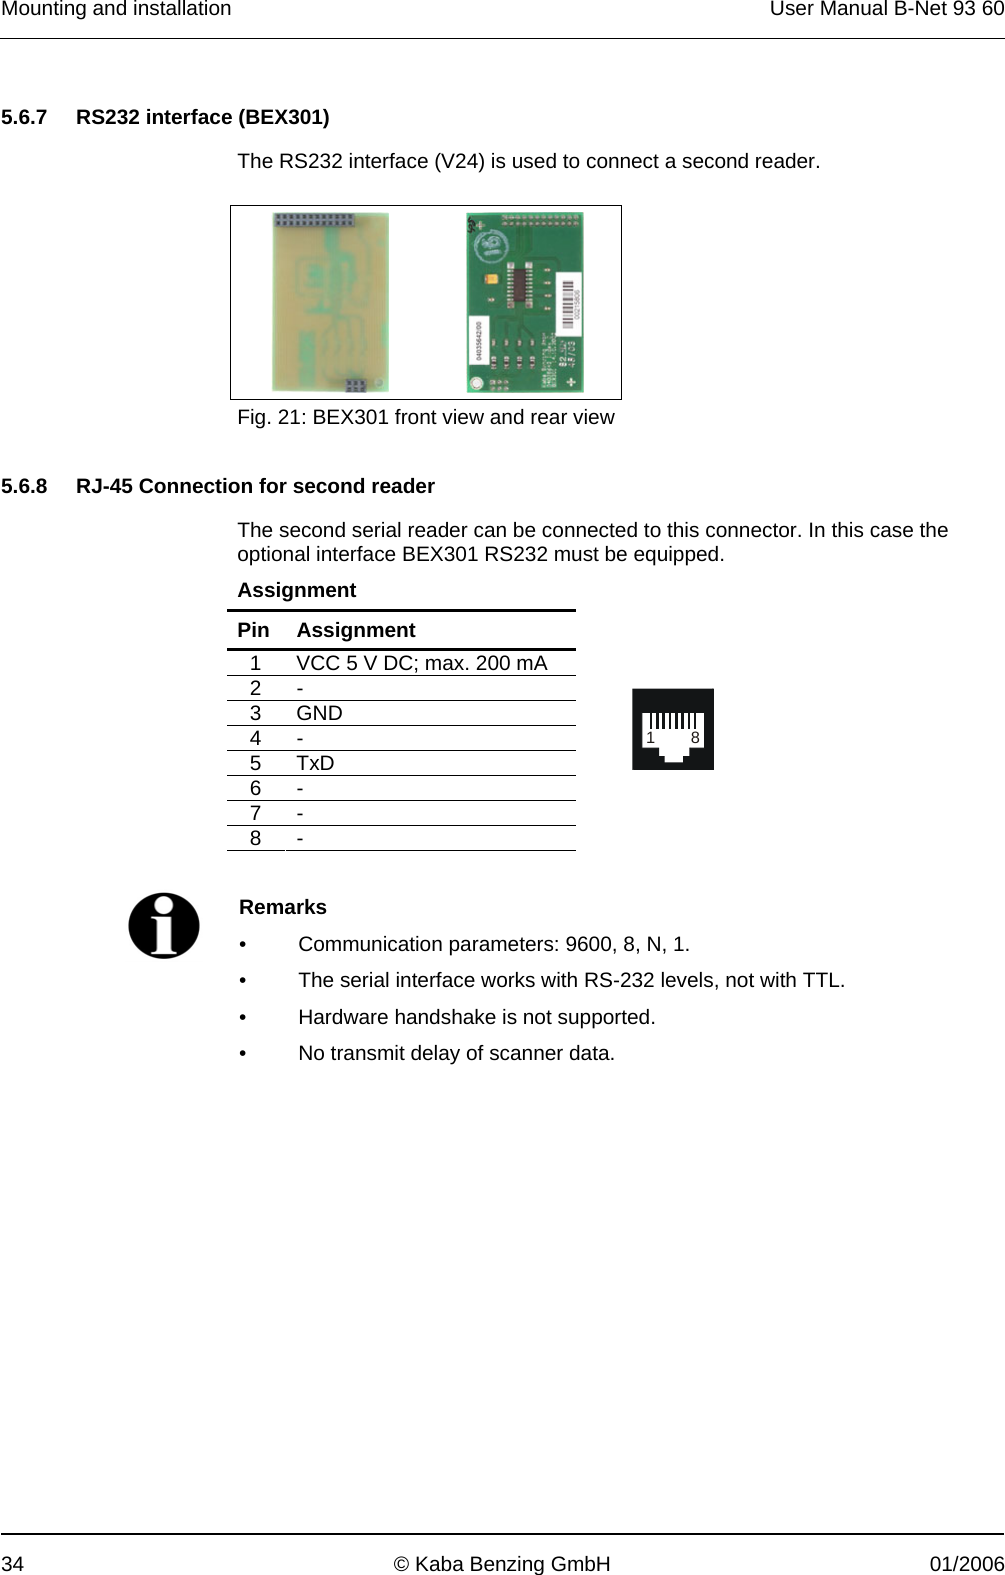 Mounting and installation  User Manual B-Net 93 60 34  © Kaba Benzing GmbH  01/2006   5.6.7  RS232 interface (BEX301)  The RS232 interface (V24) is used to connect a second reader.      Fig. 21: BEX301 front view and rear view   5.6.8  RJ-45 Connection for second reader  The second serial reader can be connected to this connector. In this case the optional interface BEX301 RS232 must be equipped. Assignment Pin Assignment 1  VCC 5 V DC; max. 200 mA 2 - 3 GND 4 - 5 TxD 6 - 7 - 8 -   18    Remarks •  Communication parameters: 9600, 8, N, 1. •  The serial interface works with RS-232 levels, not with TTL. •  Hardware handshake is not supported. •  No transmit delay of scanner data.  